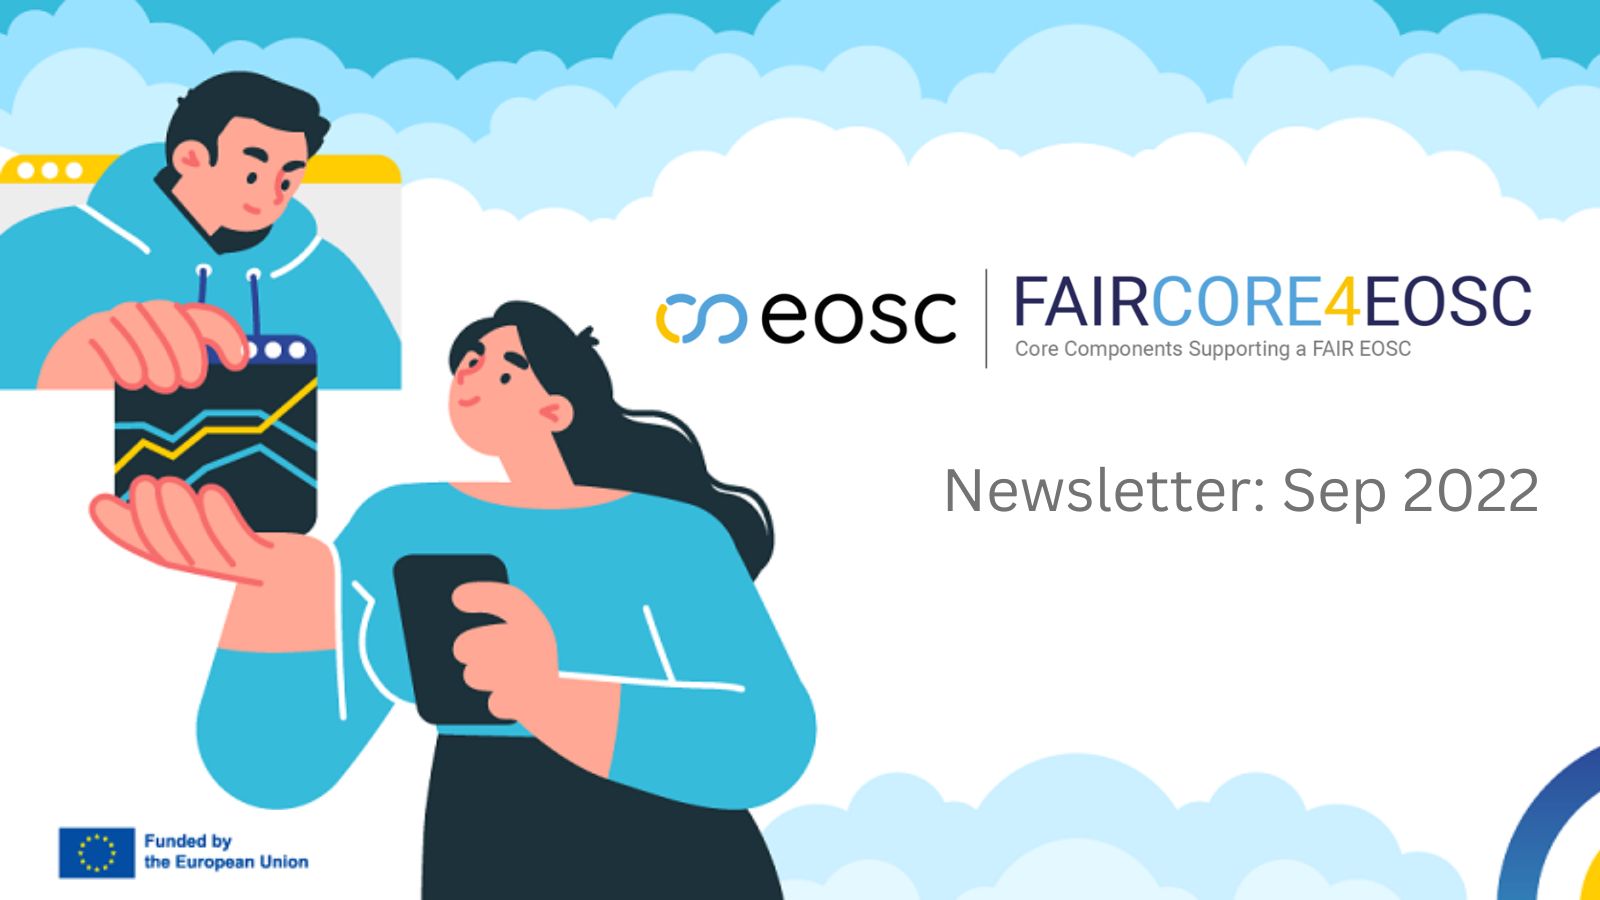 Newsletter 1: Developing EOSC-Core components to enable a FAIR EOSC ecosystem